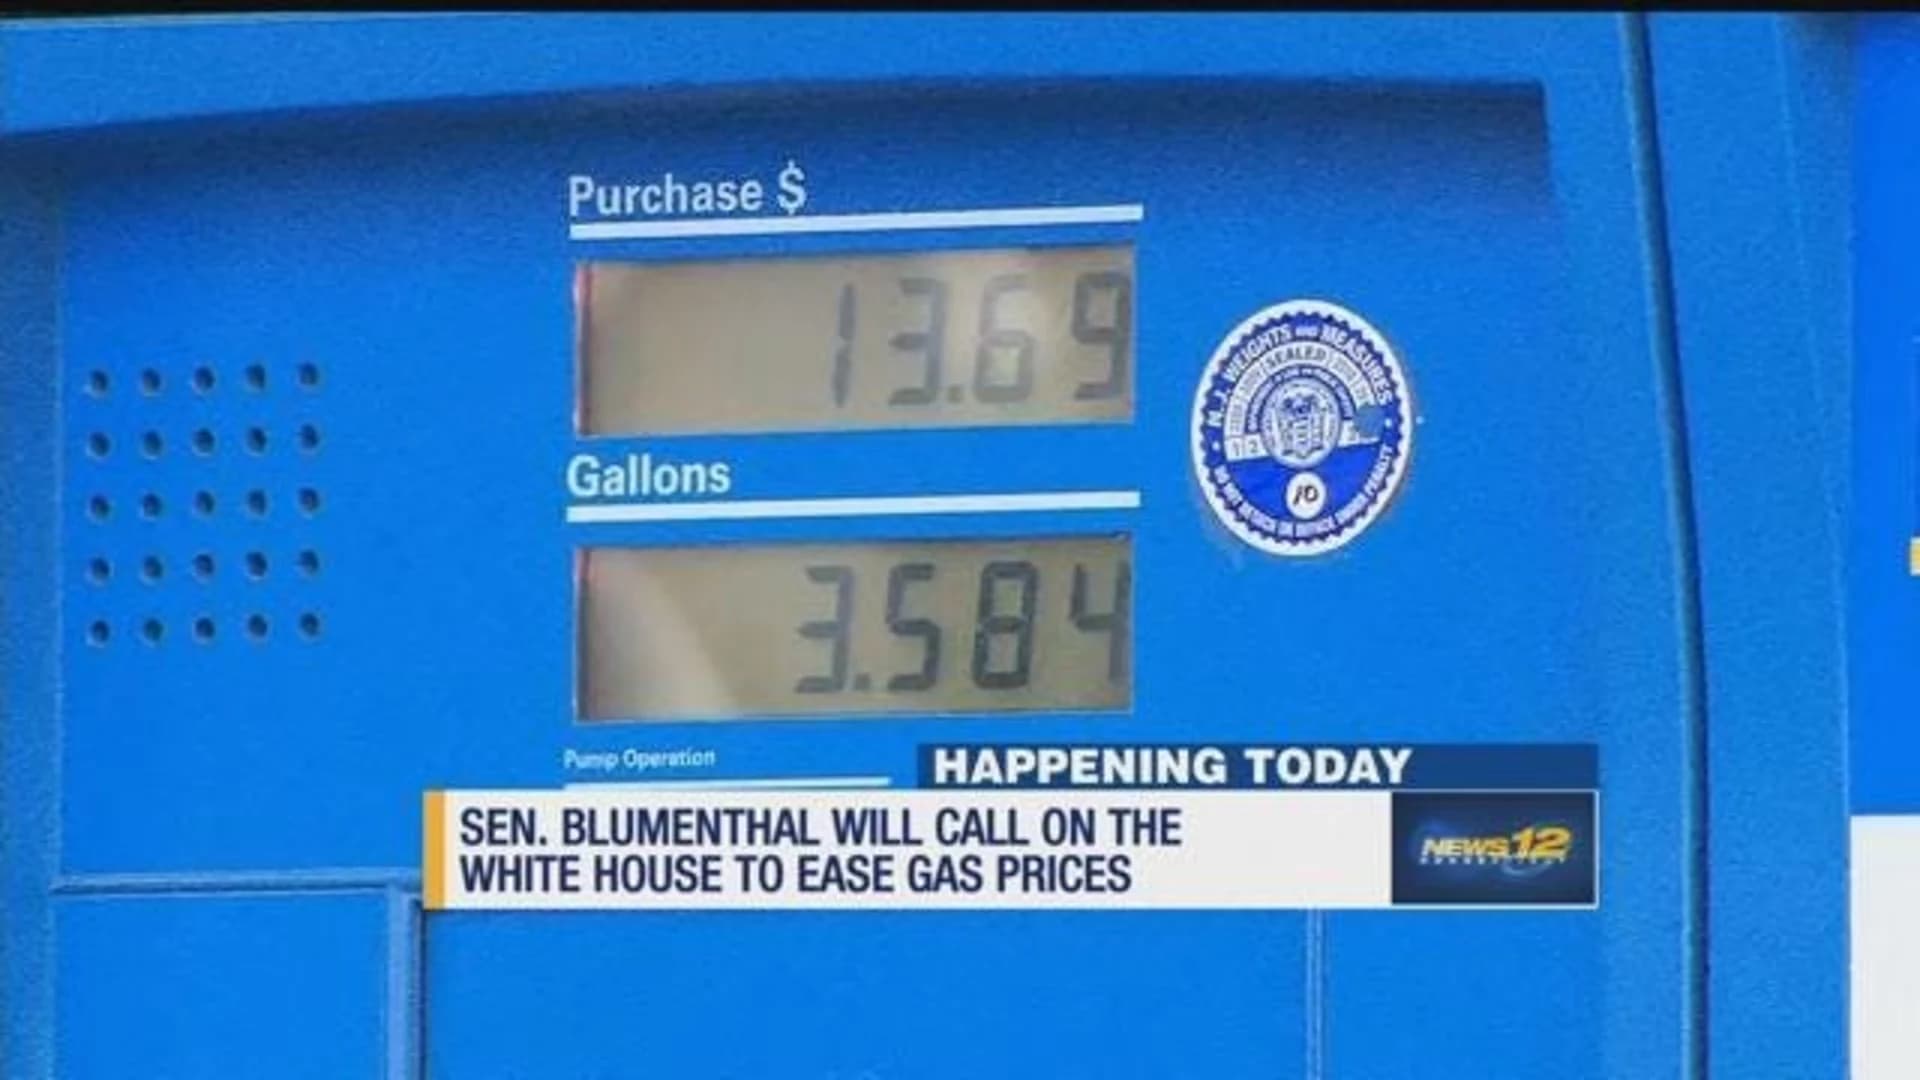 Blumenthal calls on White House to ease gas prices